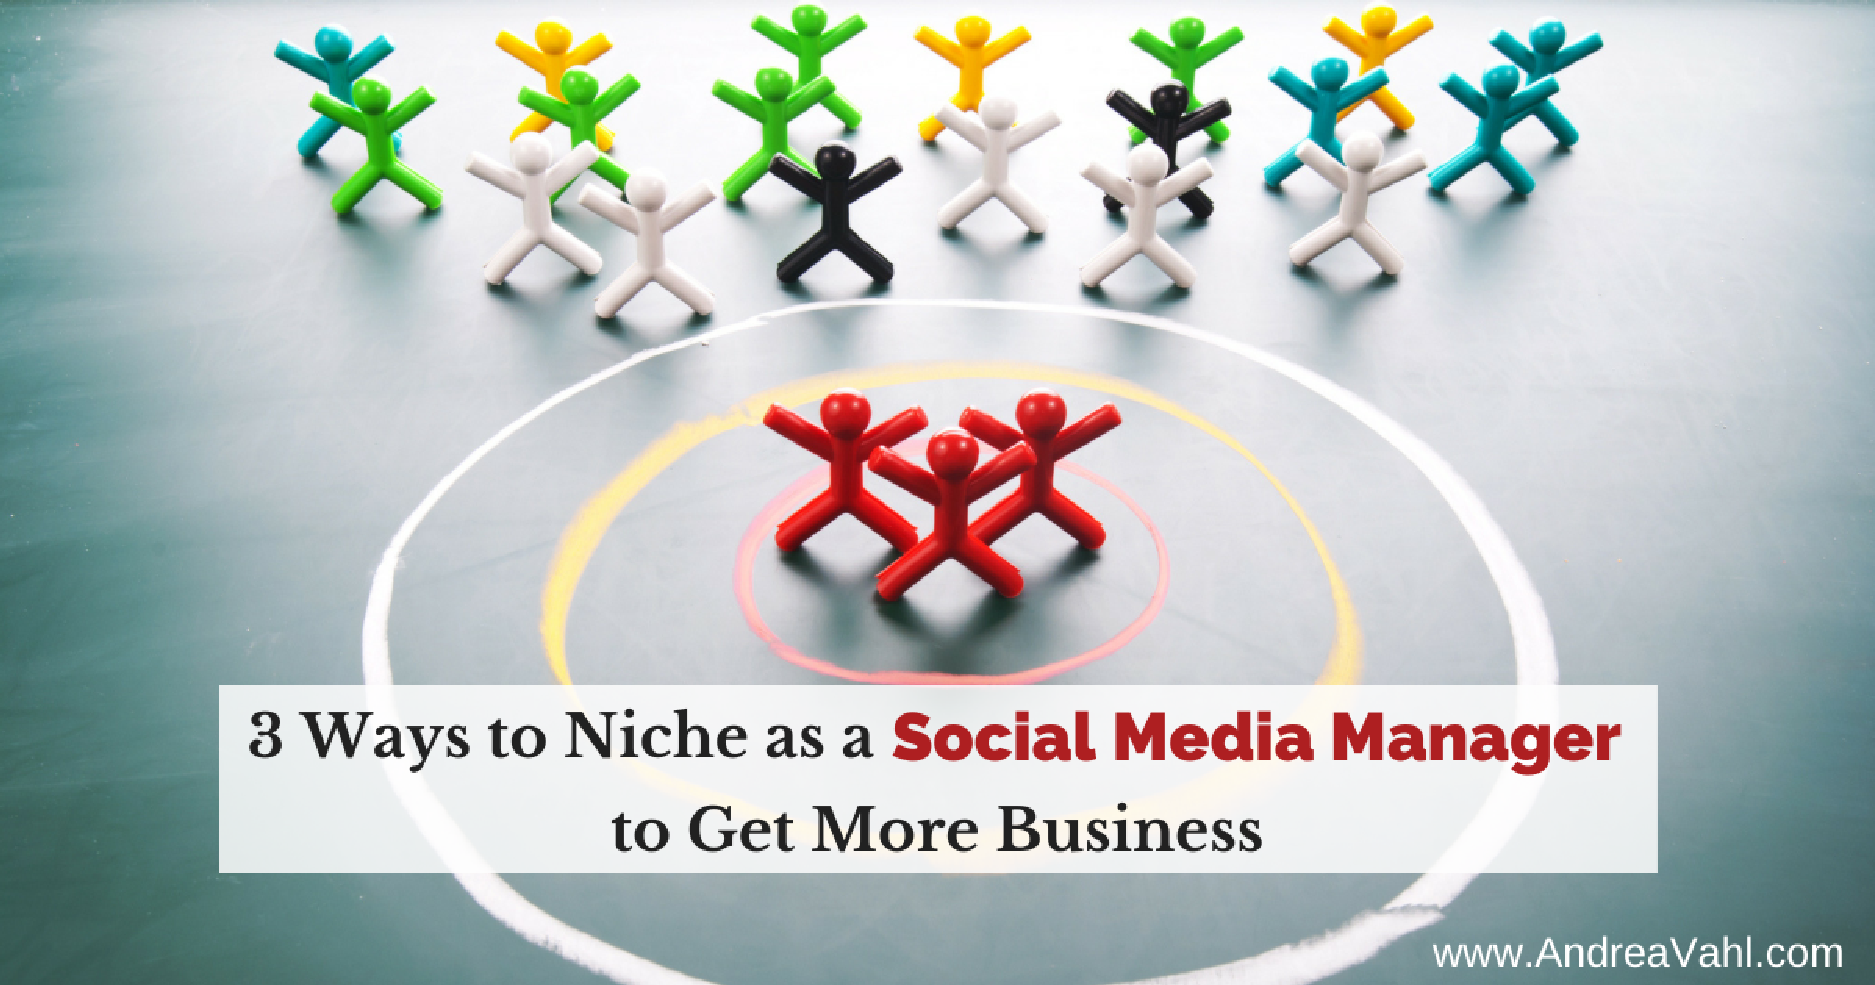 3 Ways to Niche as a Social Media Manager to Get More Business